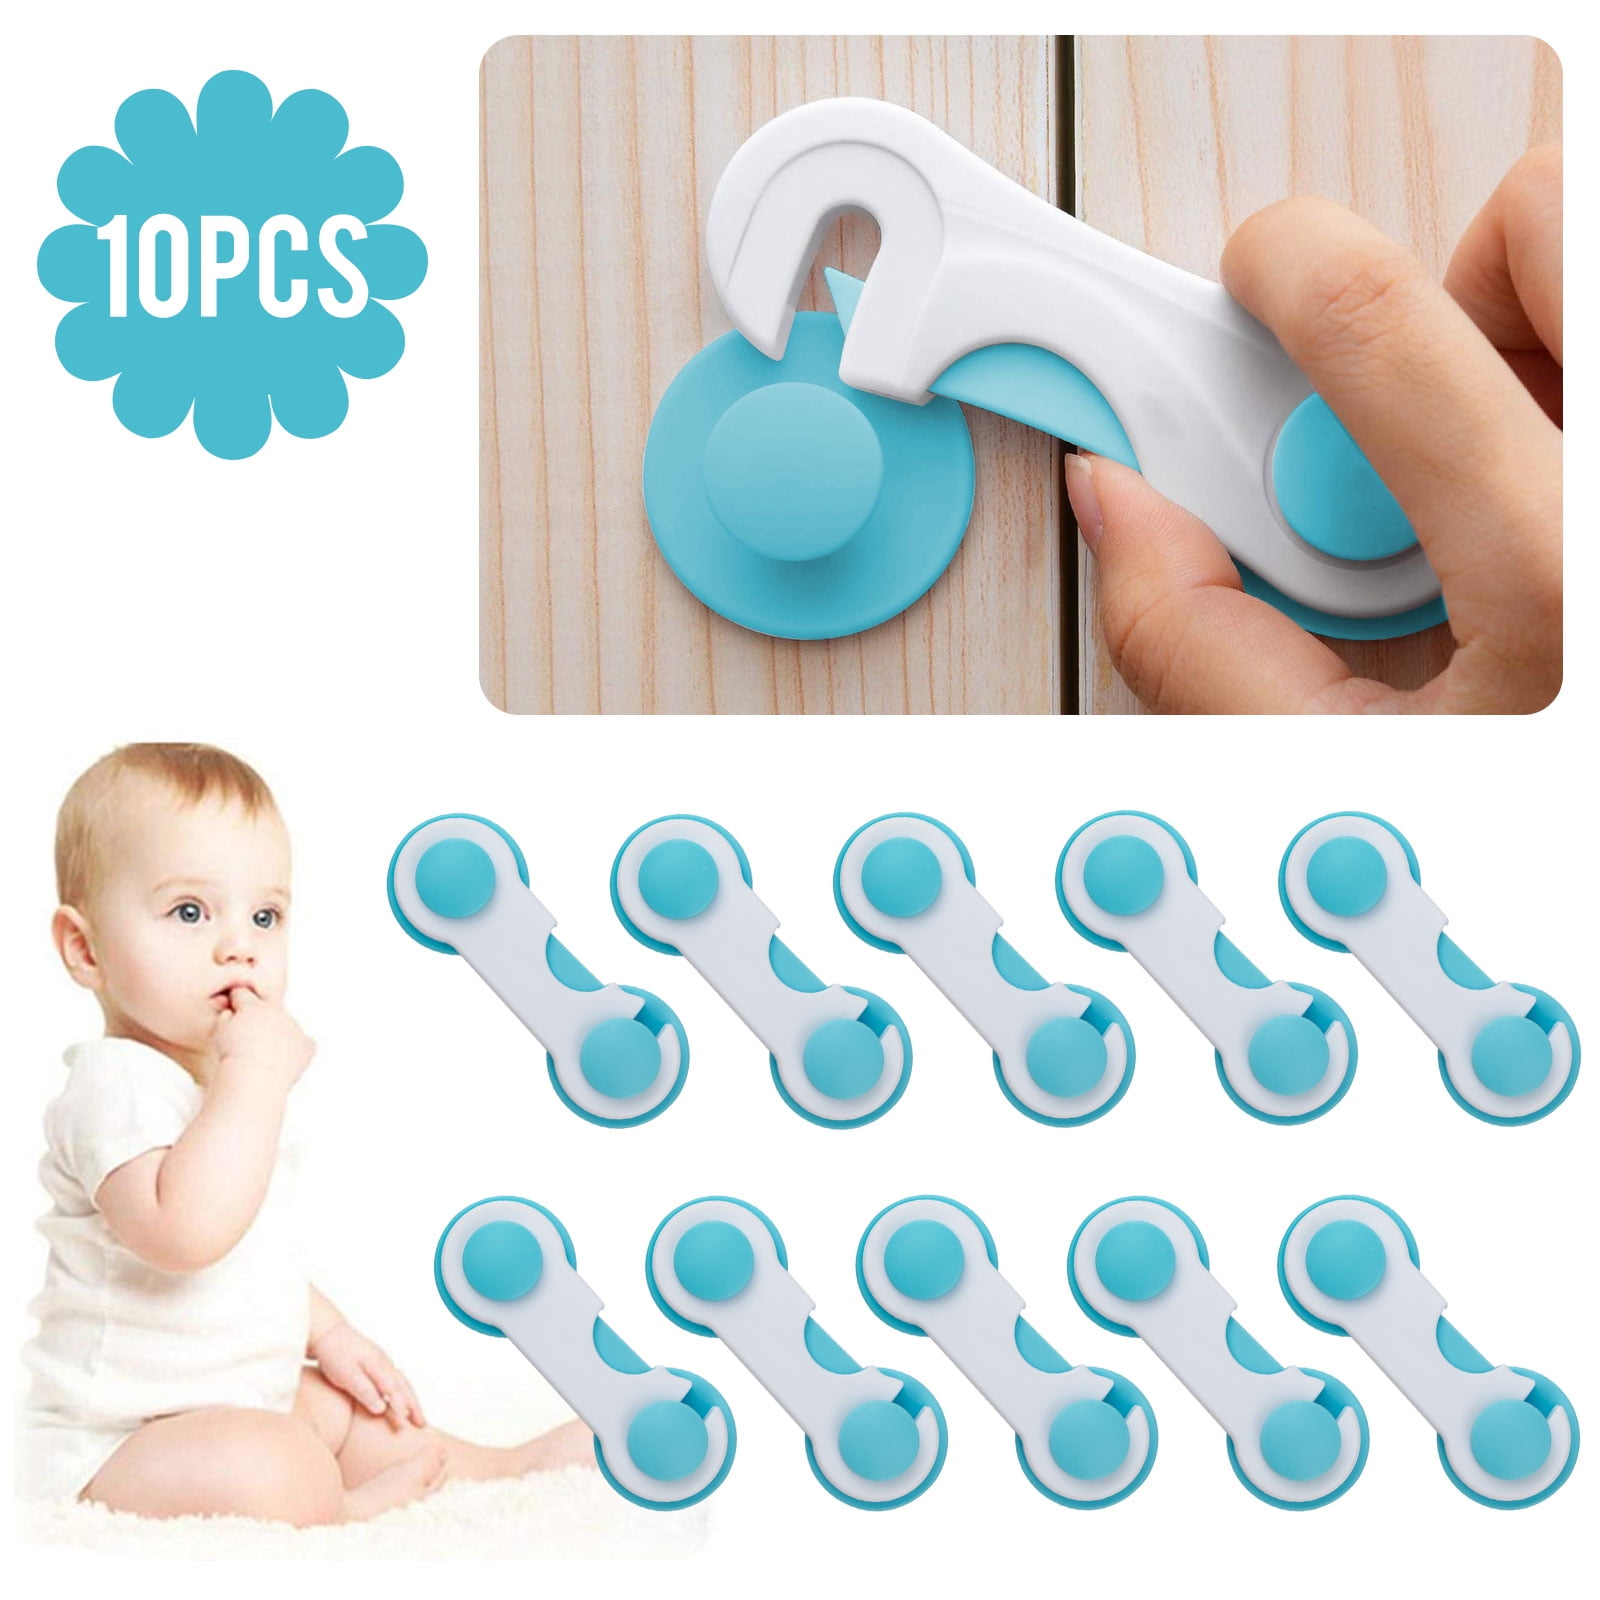 5pcs Child Baby Safety Draw Lock Door Stopper Safety Guard Protection White 